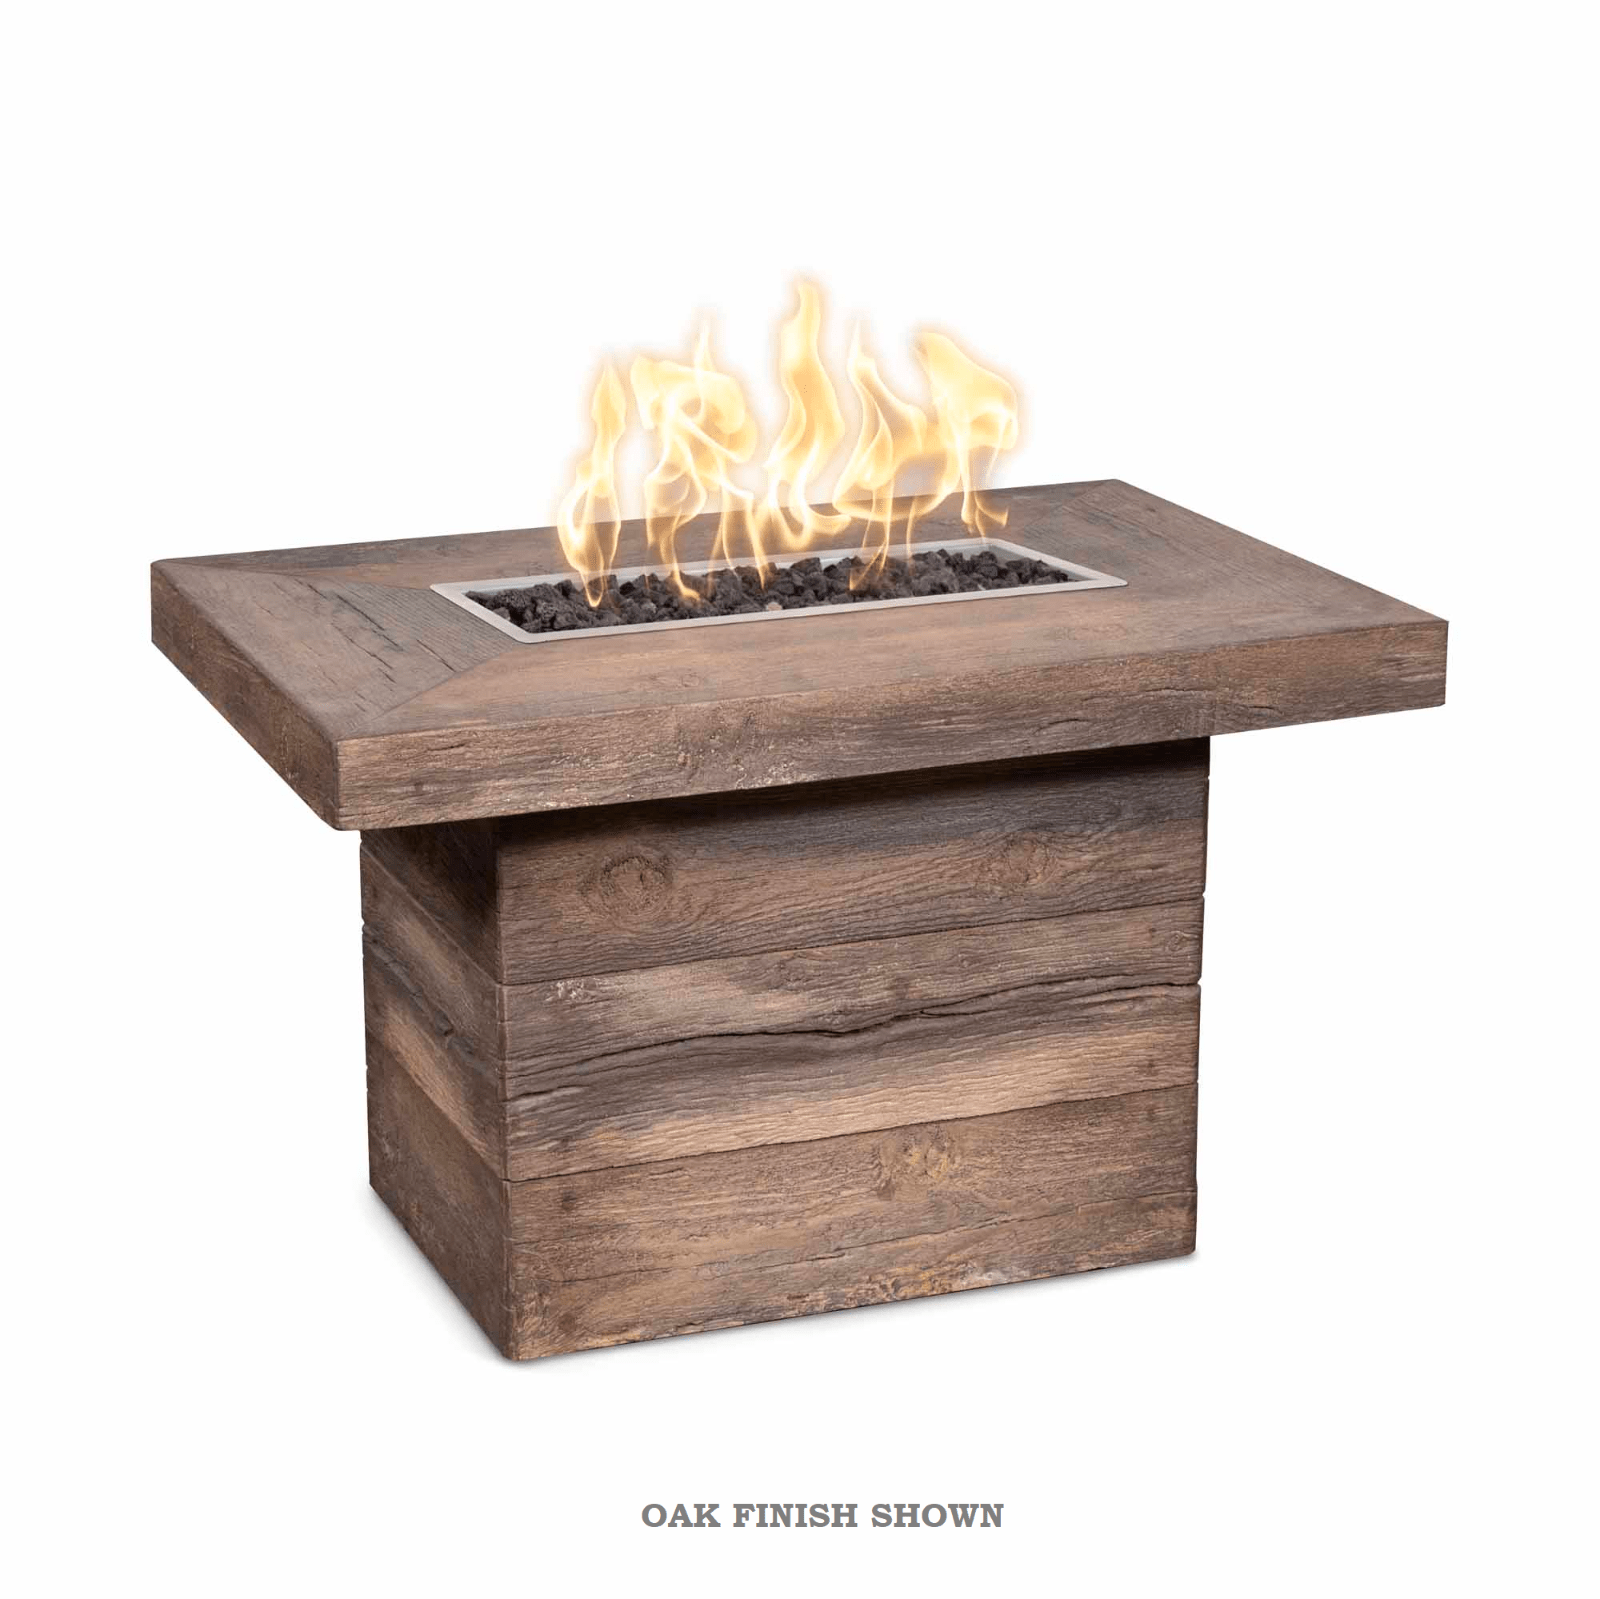 The Outdoor Plus Fire Features The Outdoor Plus 36" Alberta Fire Table Wood Grain Concrete / OPT-ALB36, OPT-ALB36FSML, OPT-ALB36FSEN, OPT-ALB36E12V, OPT-ALB36EKIT